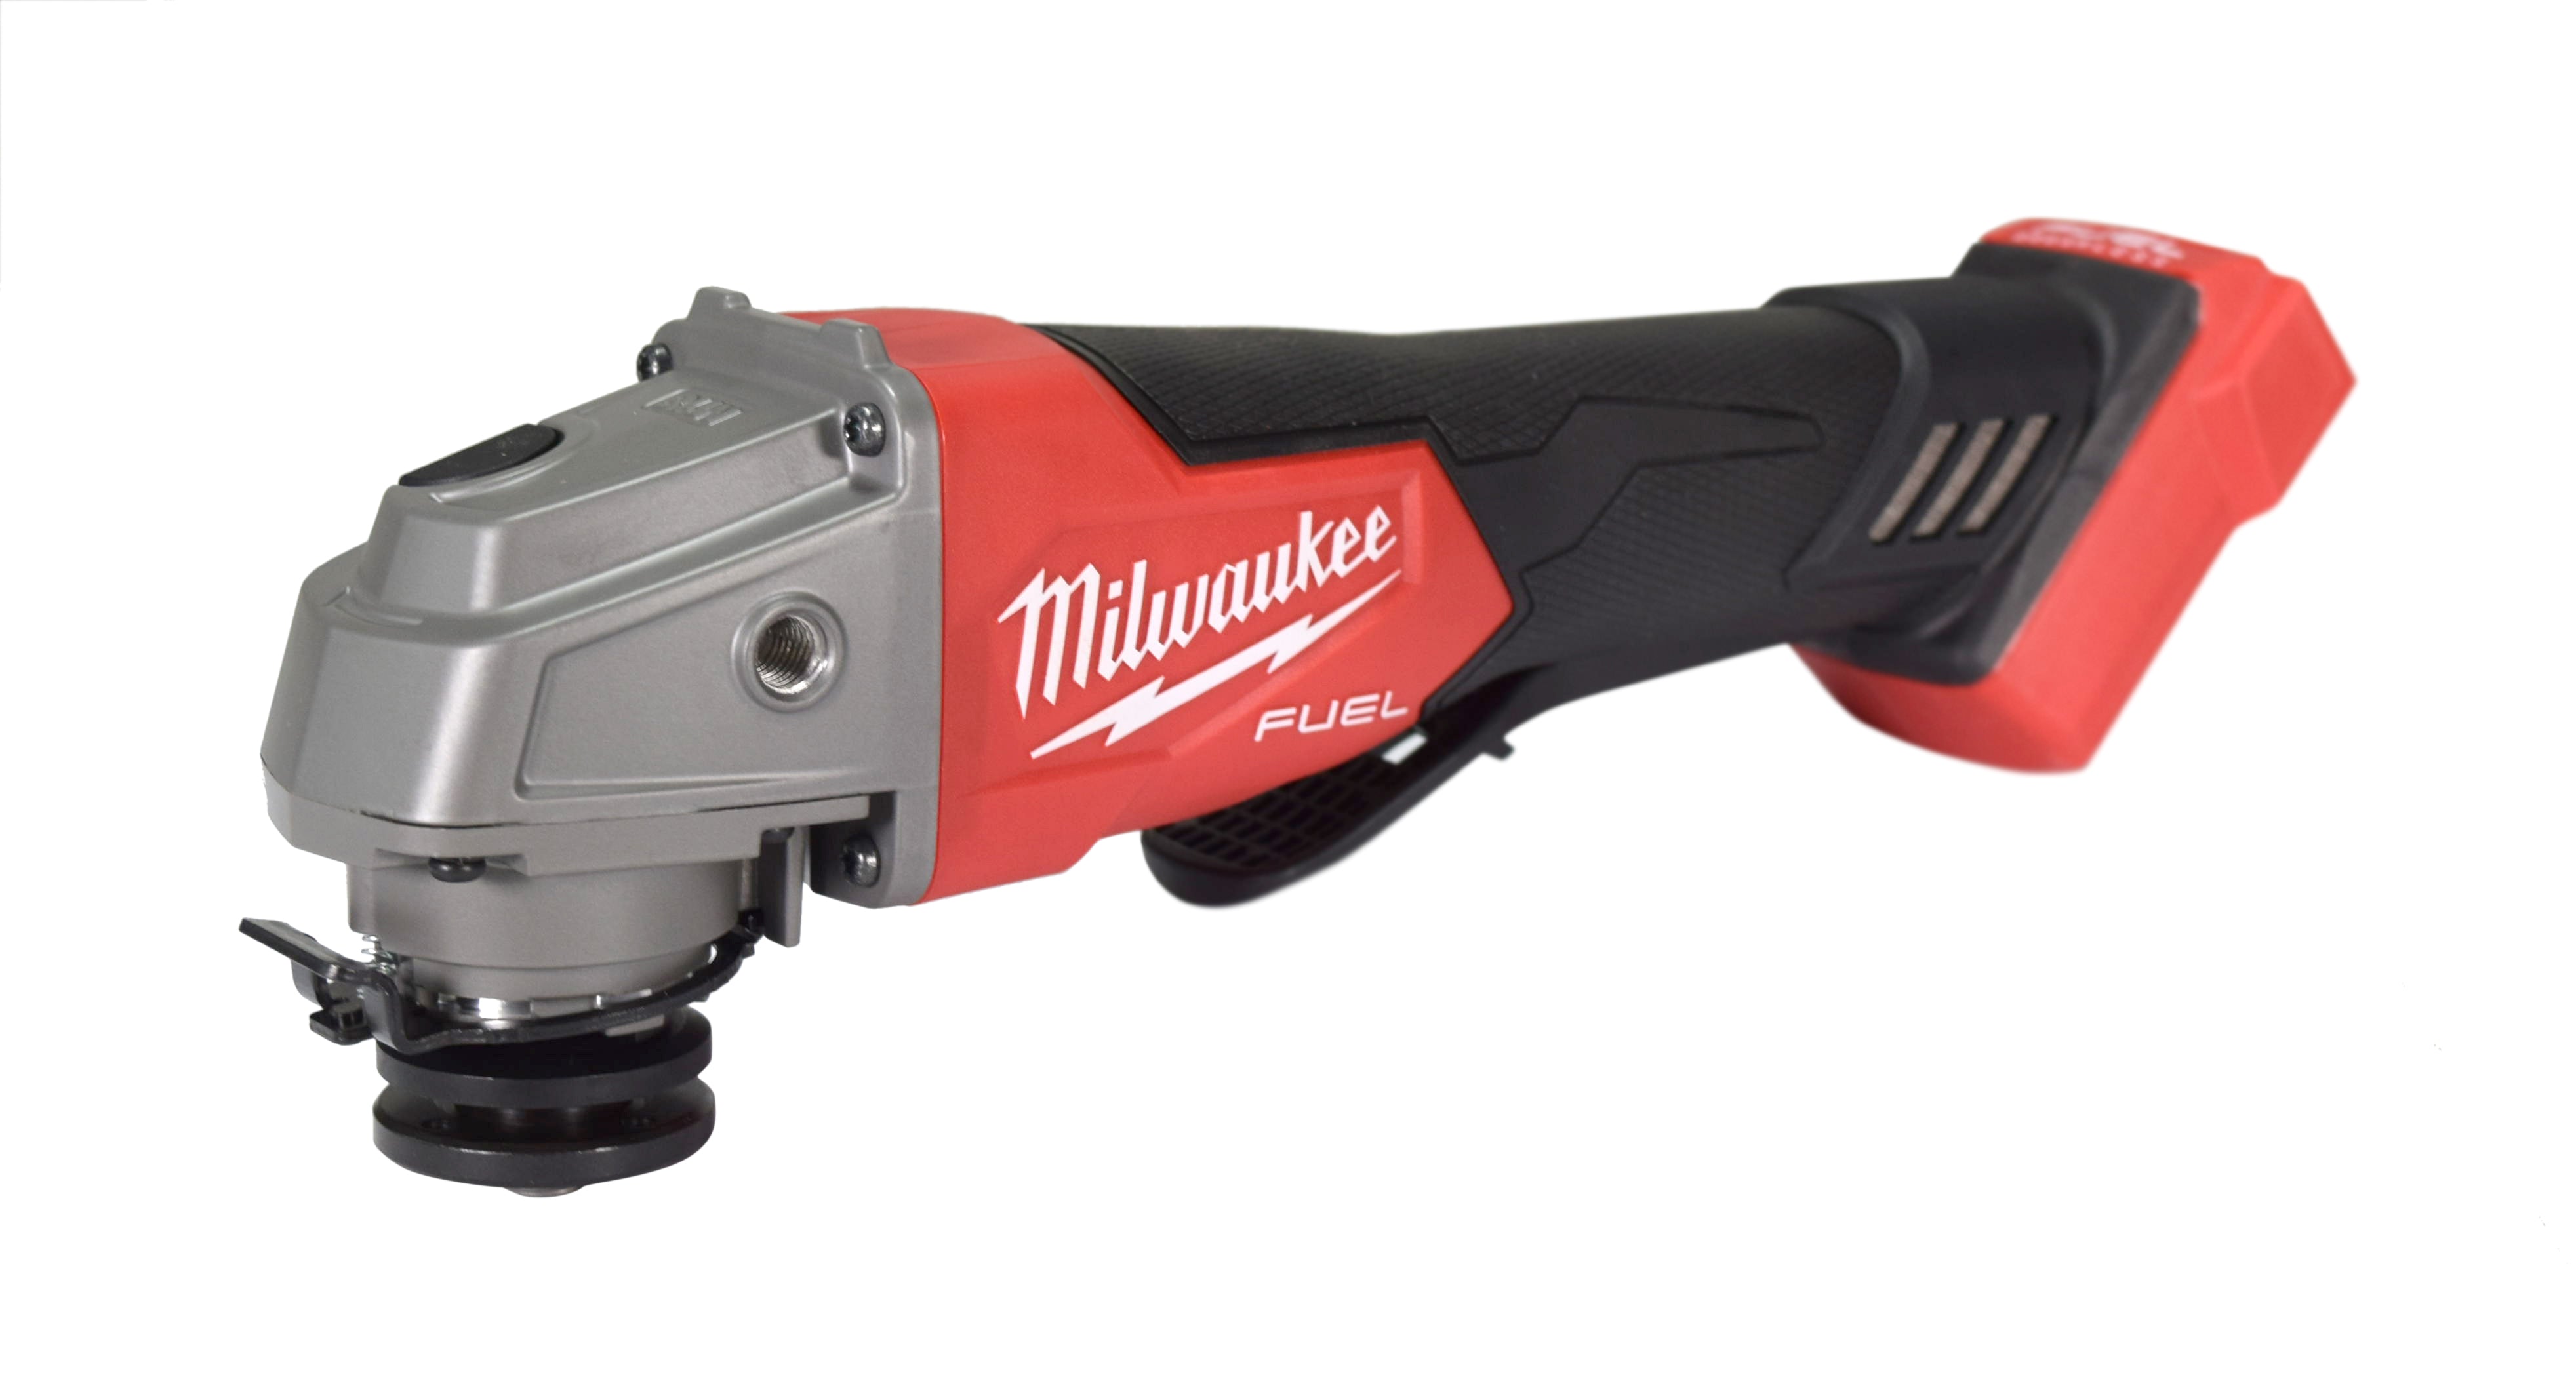 Milwaukee-2880-20-M18-FUEL-4-1-2-5-Grinder-Paddle-Switch-No-Lock-No-Charger-No-Battery-Bare-Tool-Only-image-4